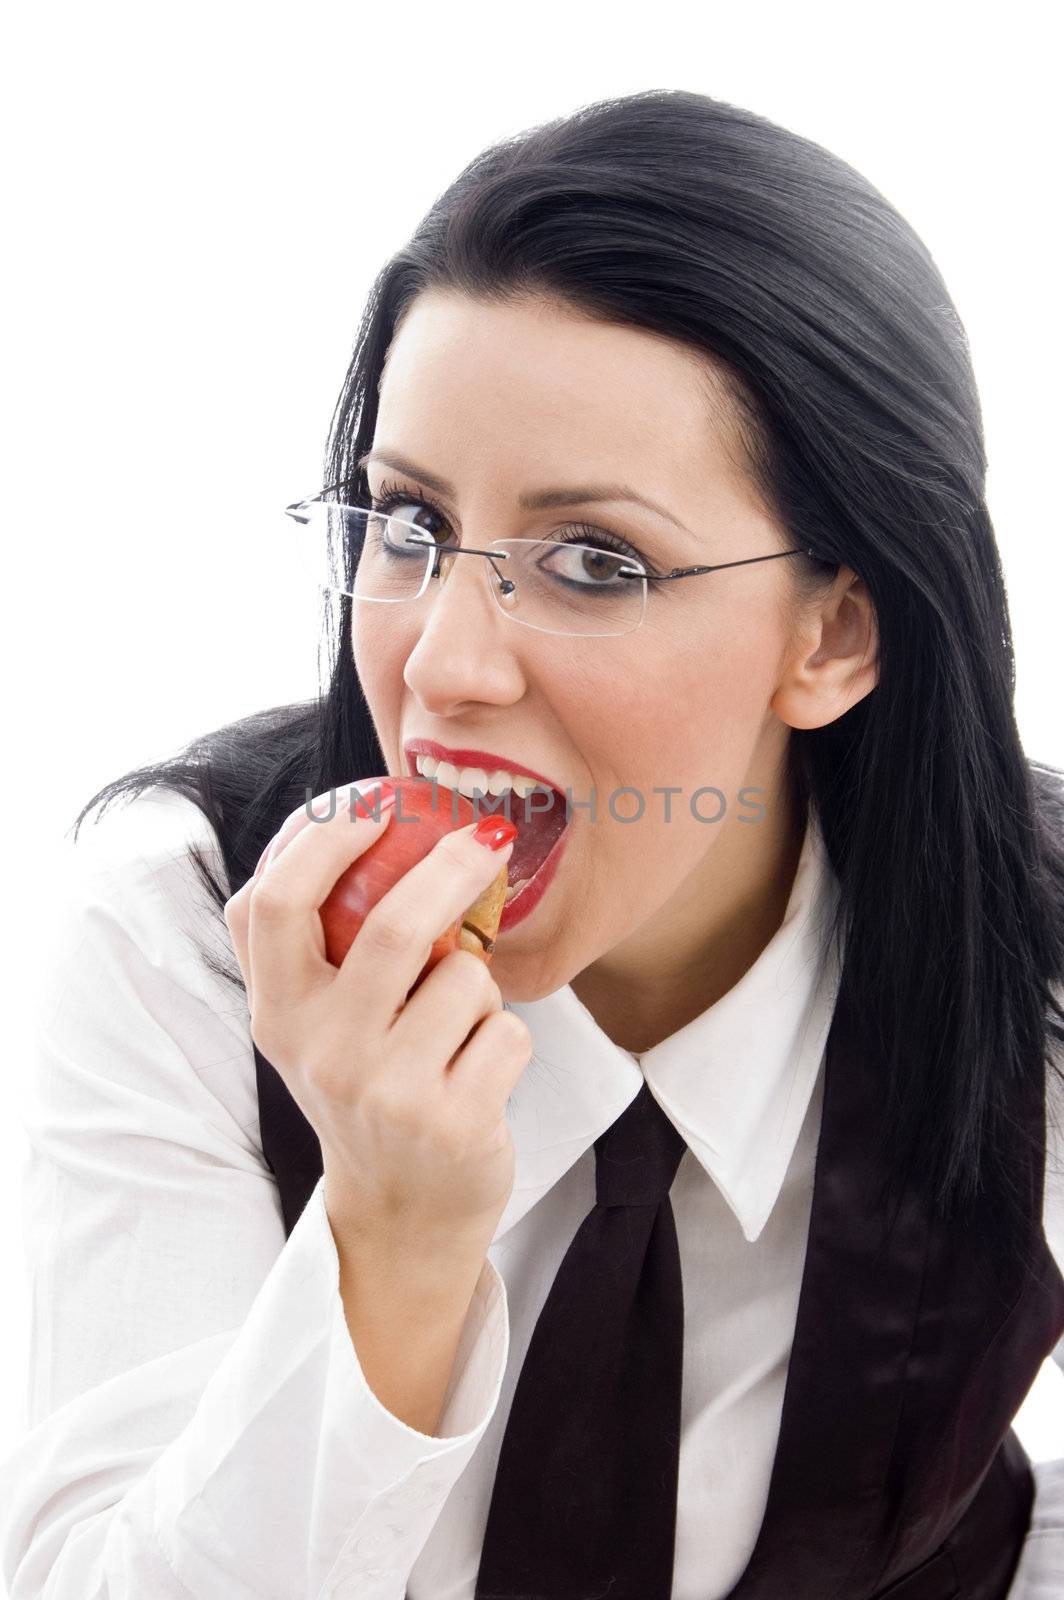 caucasian model wearing spectacles eating an apple against white background